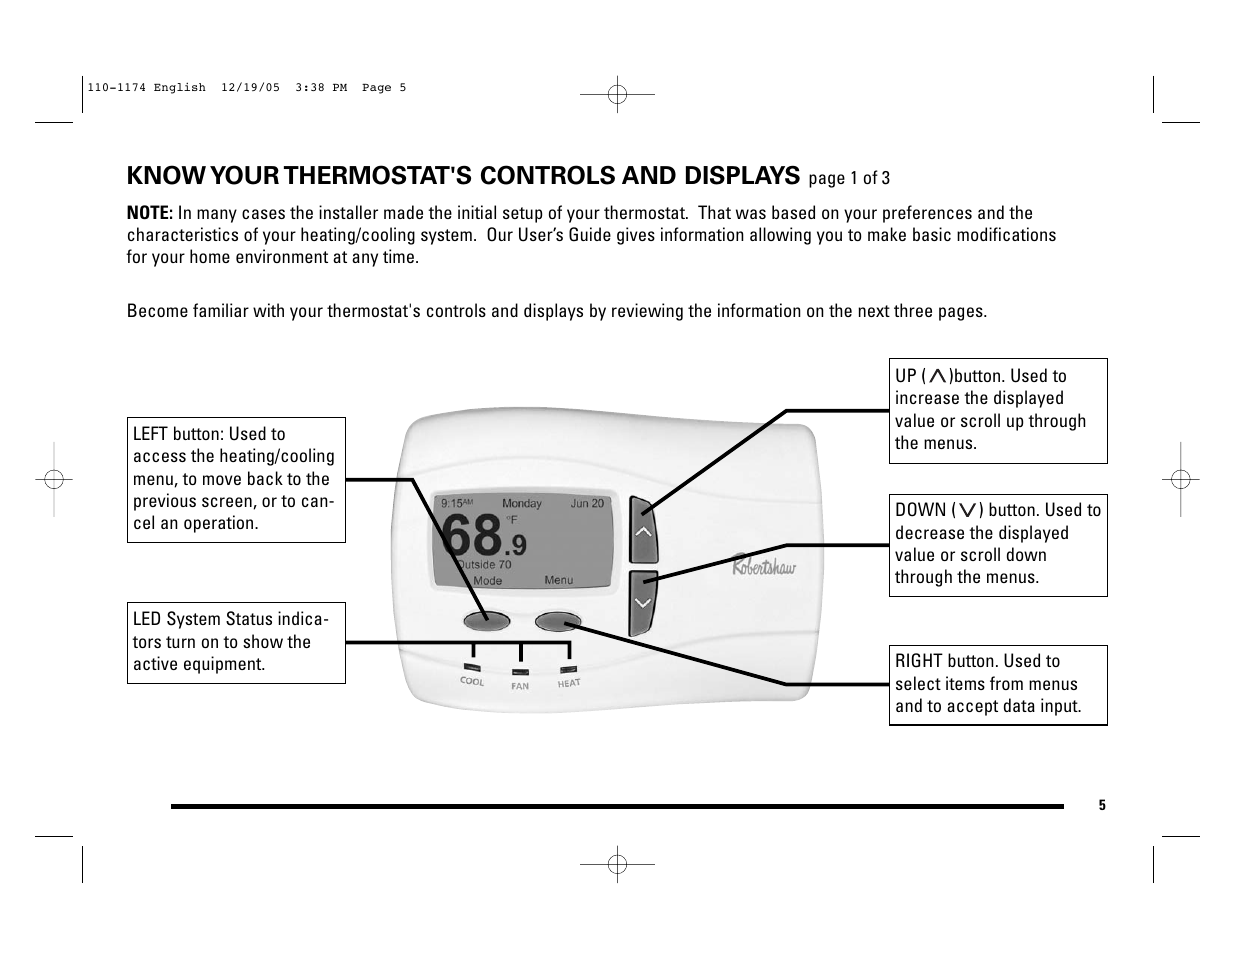 Know your thermostat's controls and displays | Robertshaw 9725i2 USERS